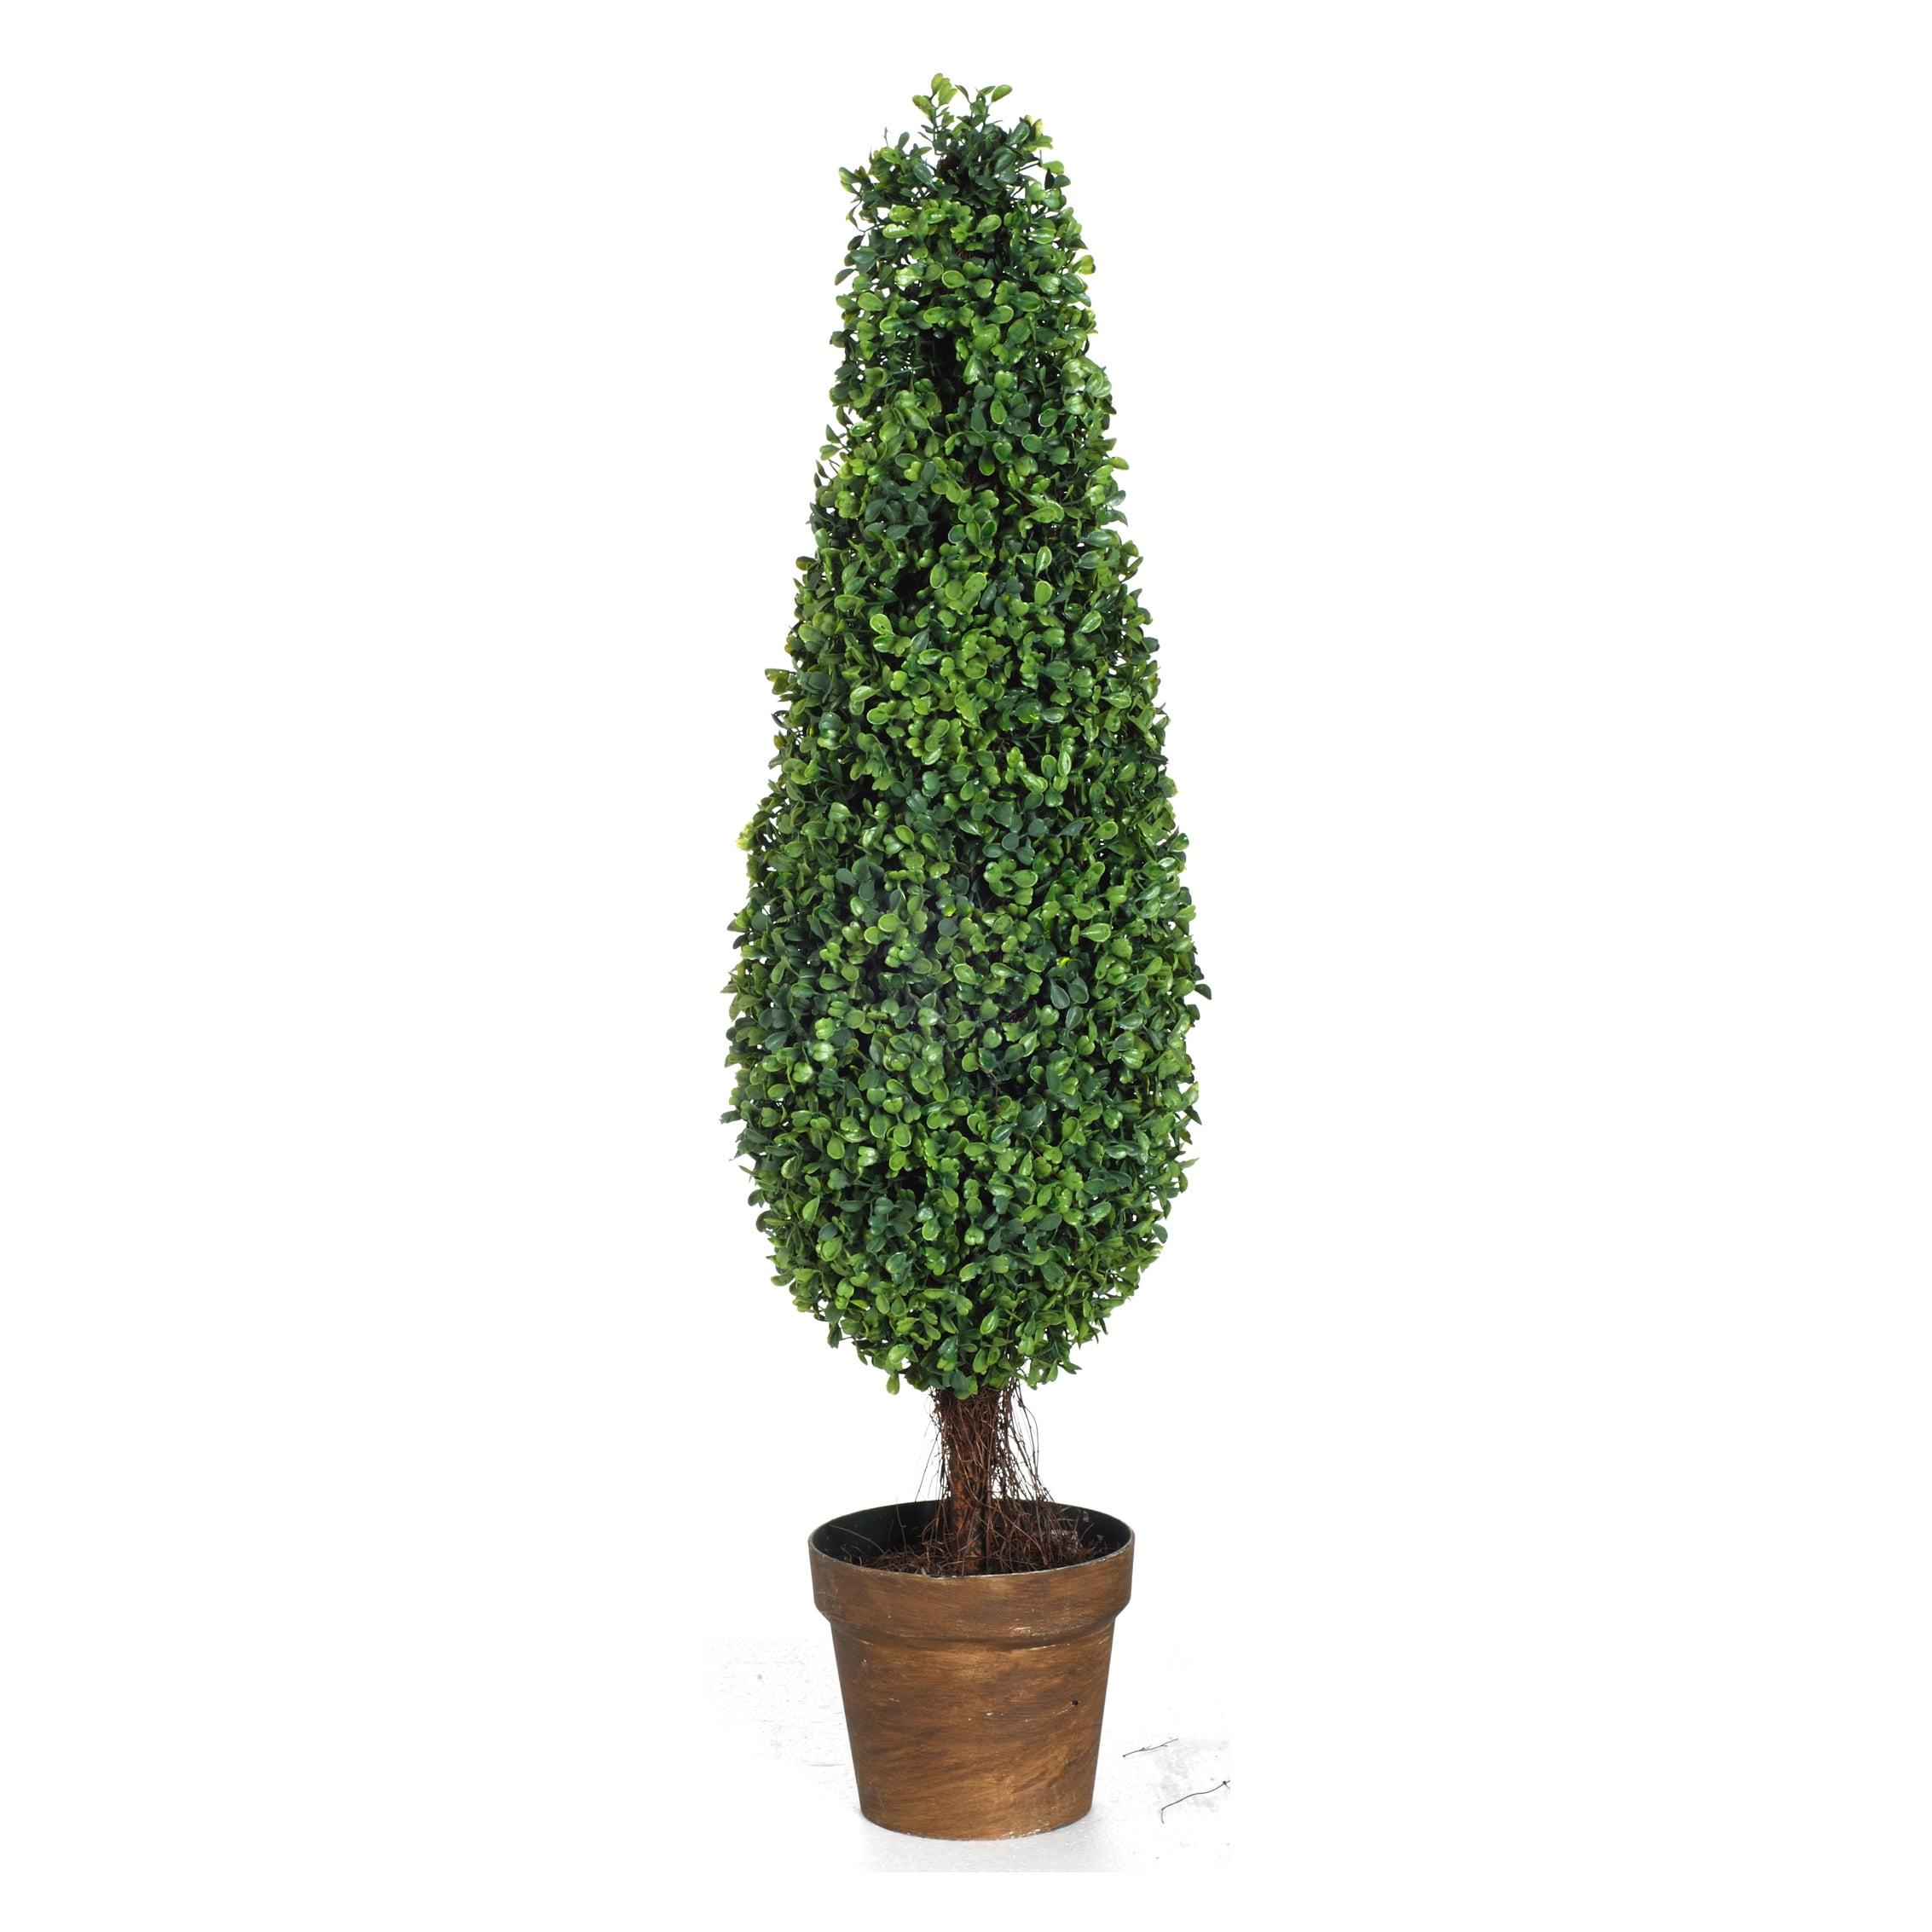 Elegant 35" Outdoor Faux Boxwood Topiary in Pot